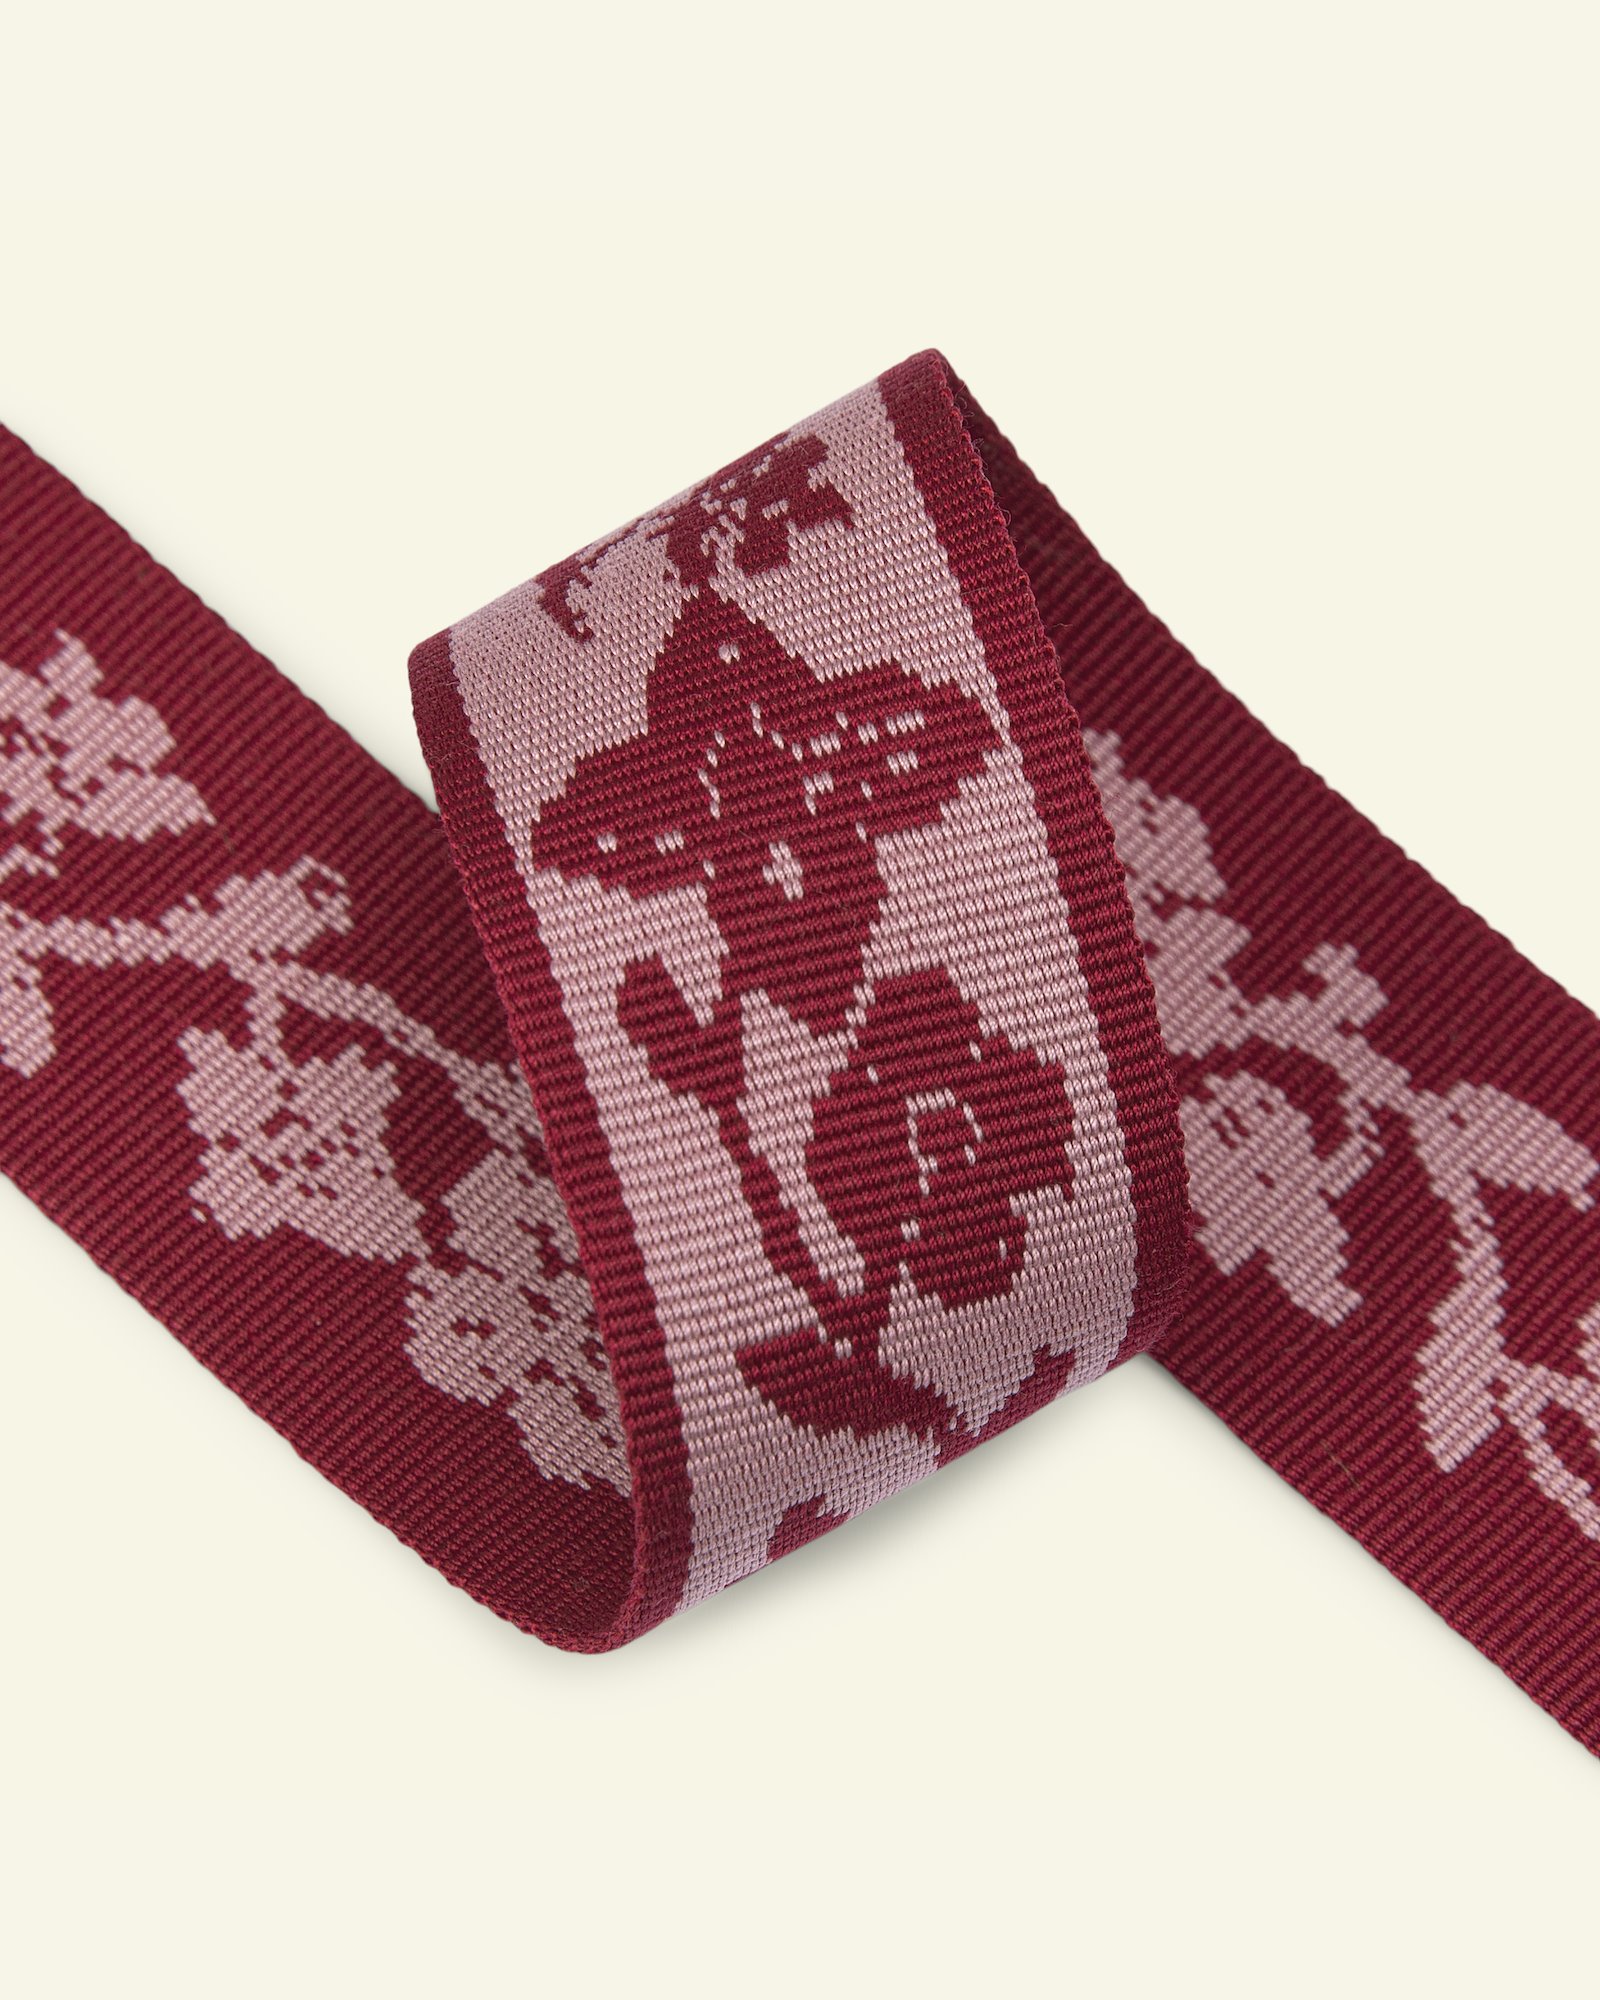 Ribbon woven 40mm dark red/rose 2m 22435_pack